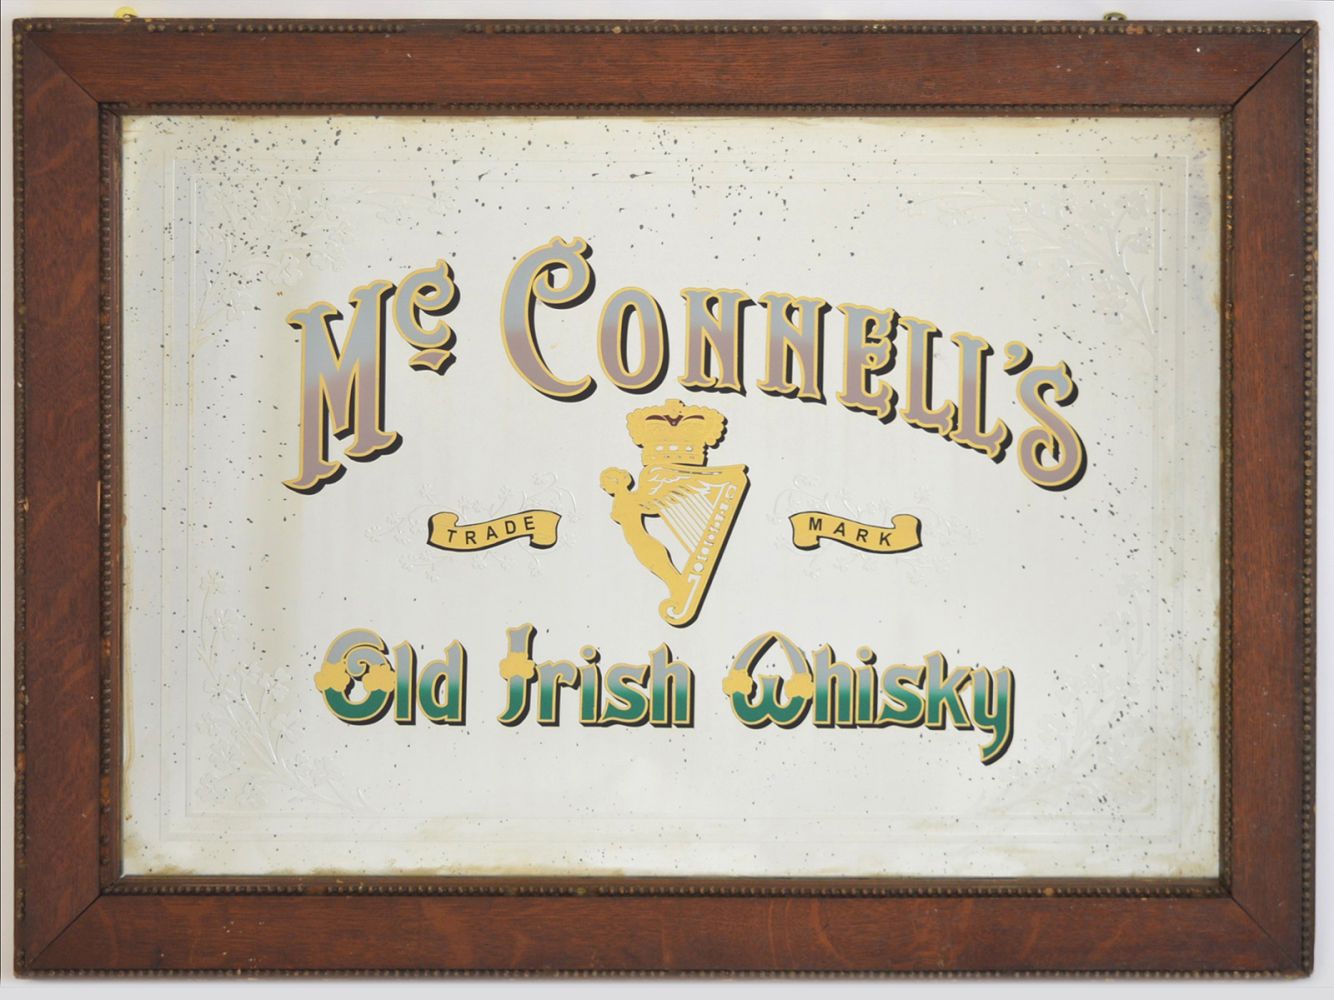 MCCONNELL'S OLD IRISH WHISKEY ADVERTISING MIRROR